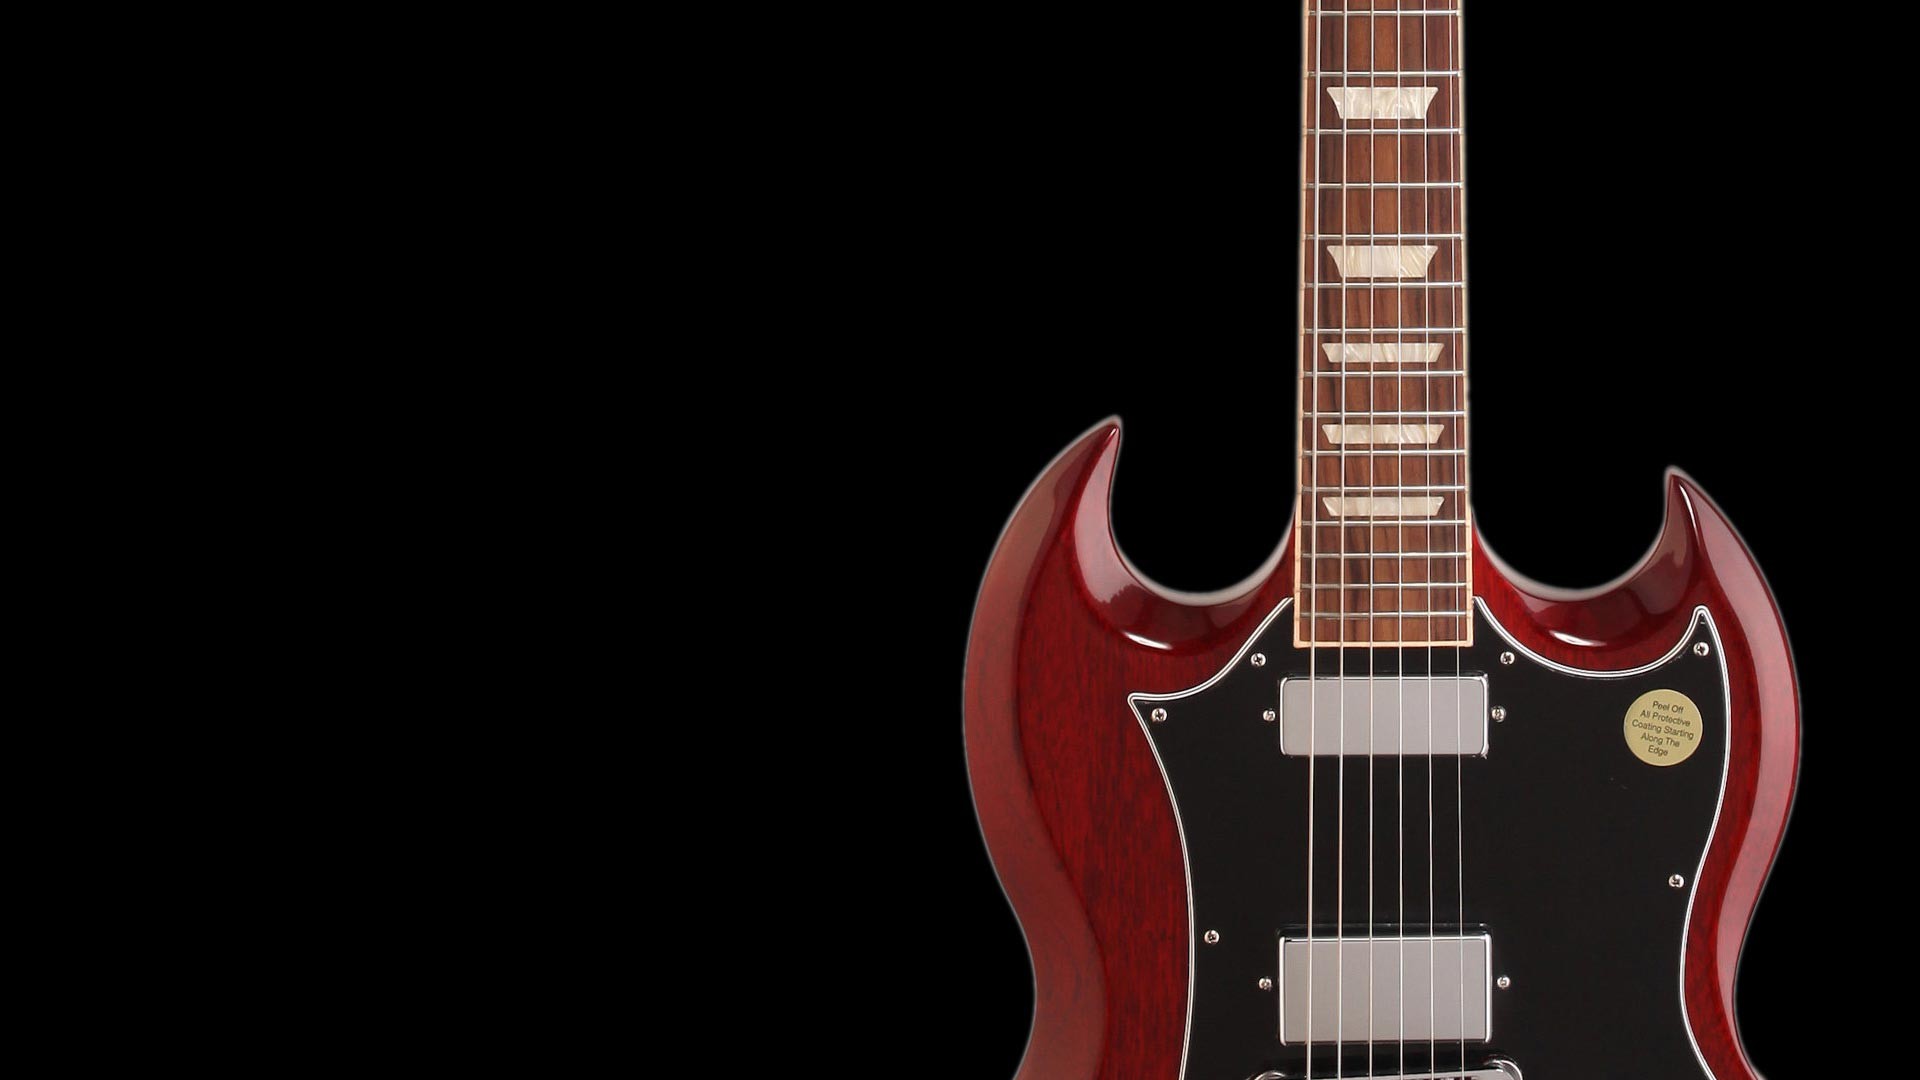 1920x1080 Recognizable patterns from legendary guitarists like Angus Young, Eddie Van  Halen, Dimebag Darrell and several others. Rock out with this one.